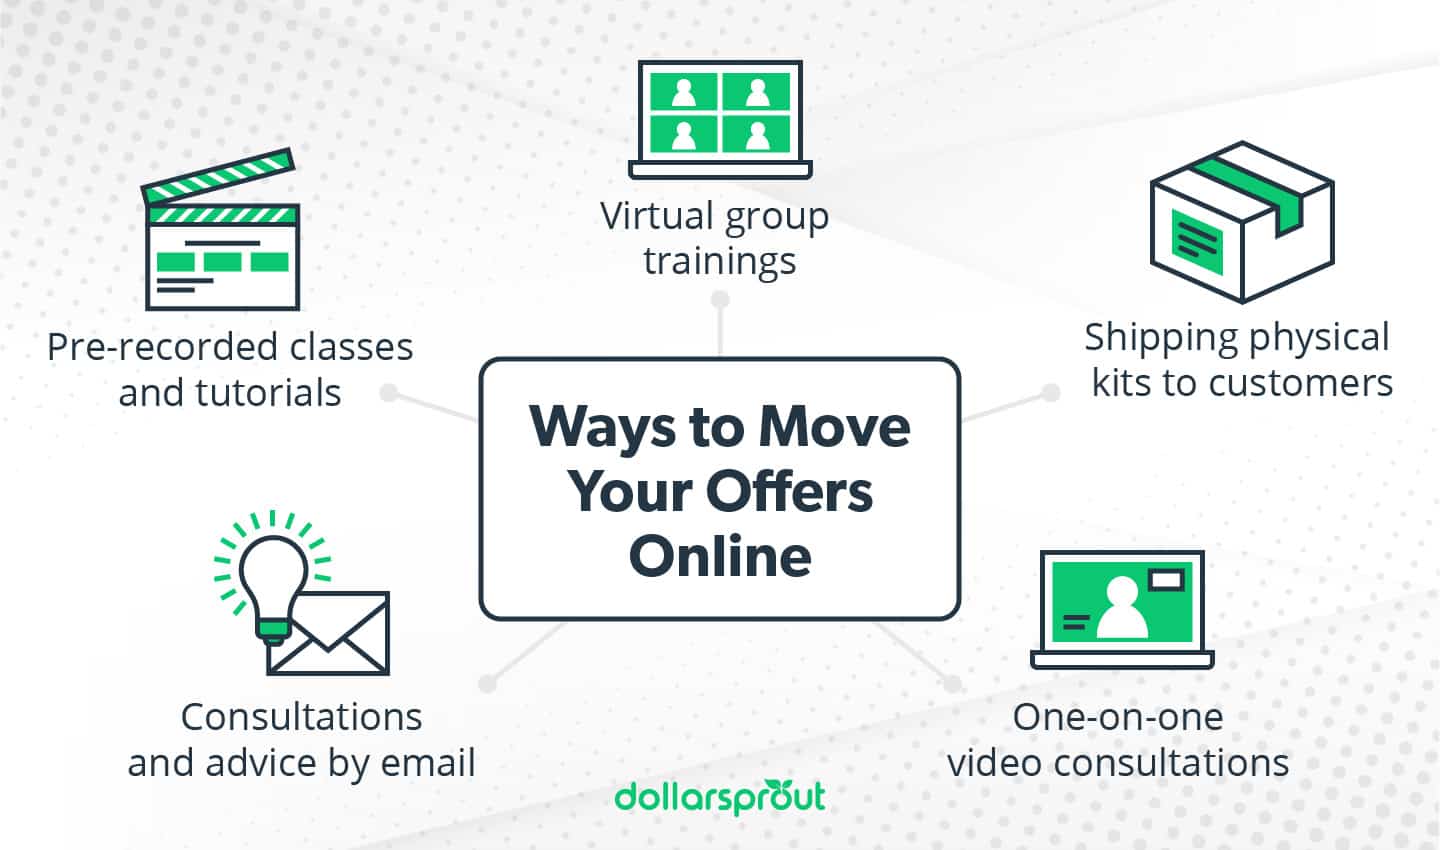 Ways to move your offers online